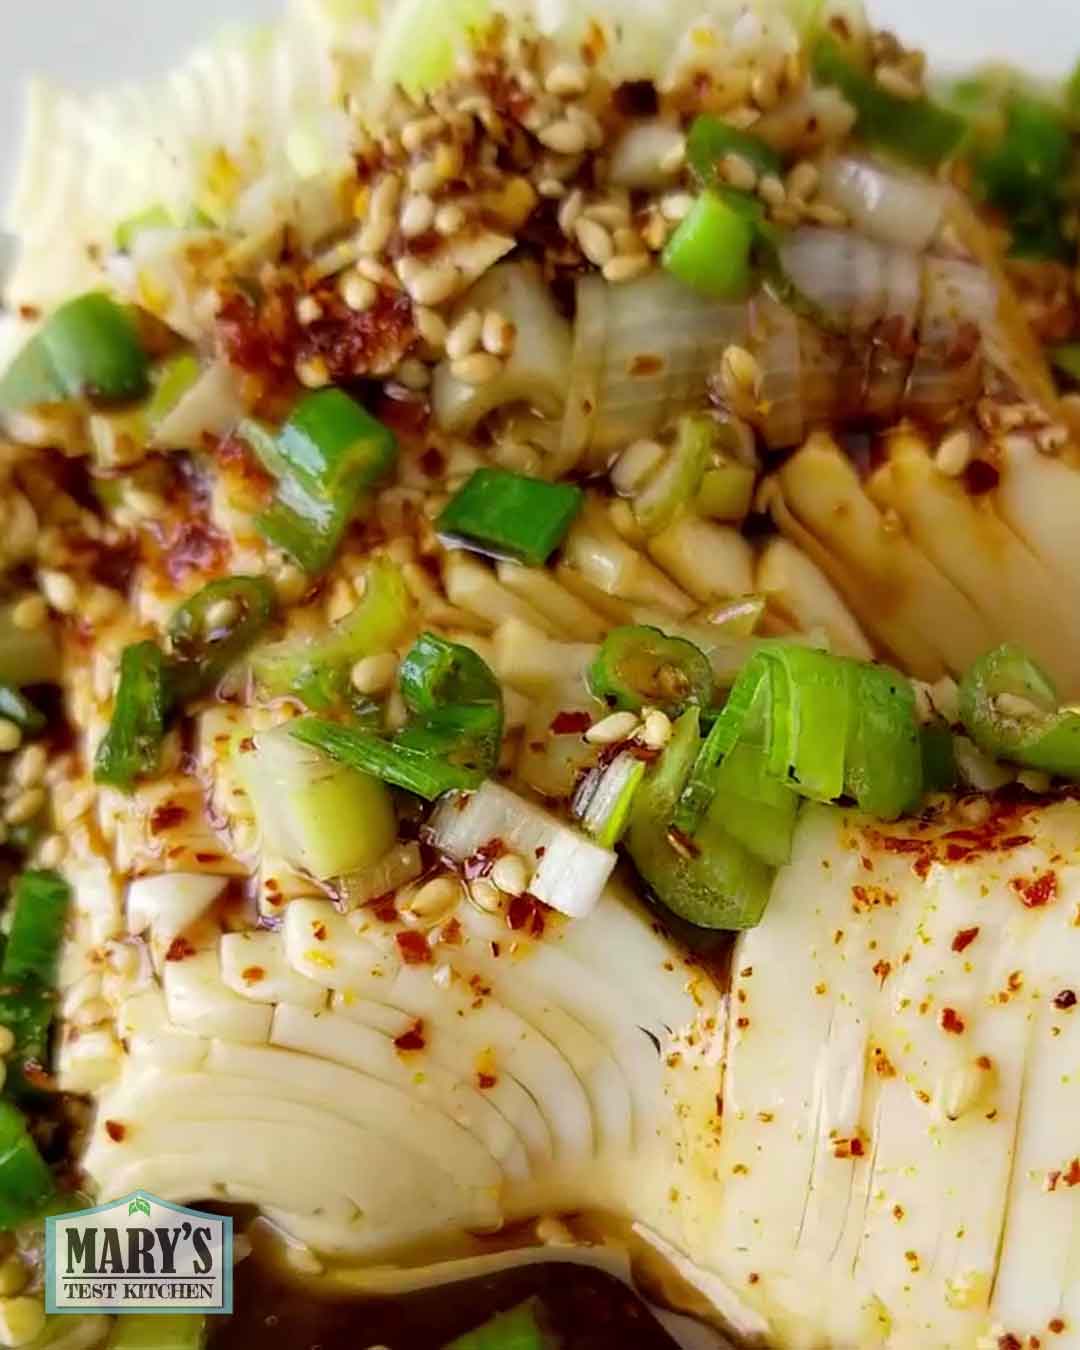 silken tofu sliced for texture and topped with green onion, sesame seeds, chili powder and hot oil